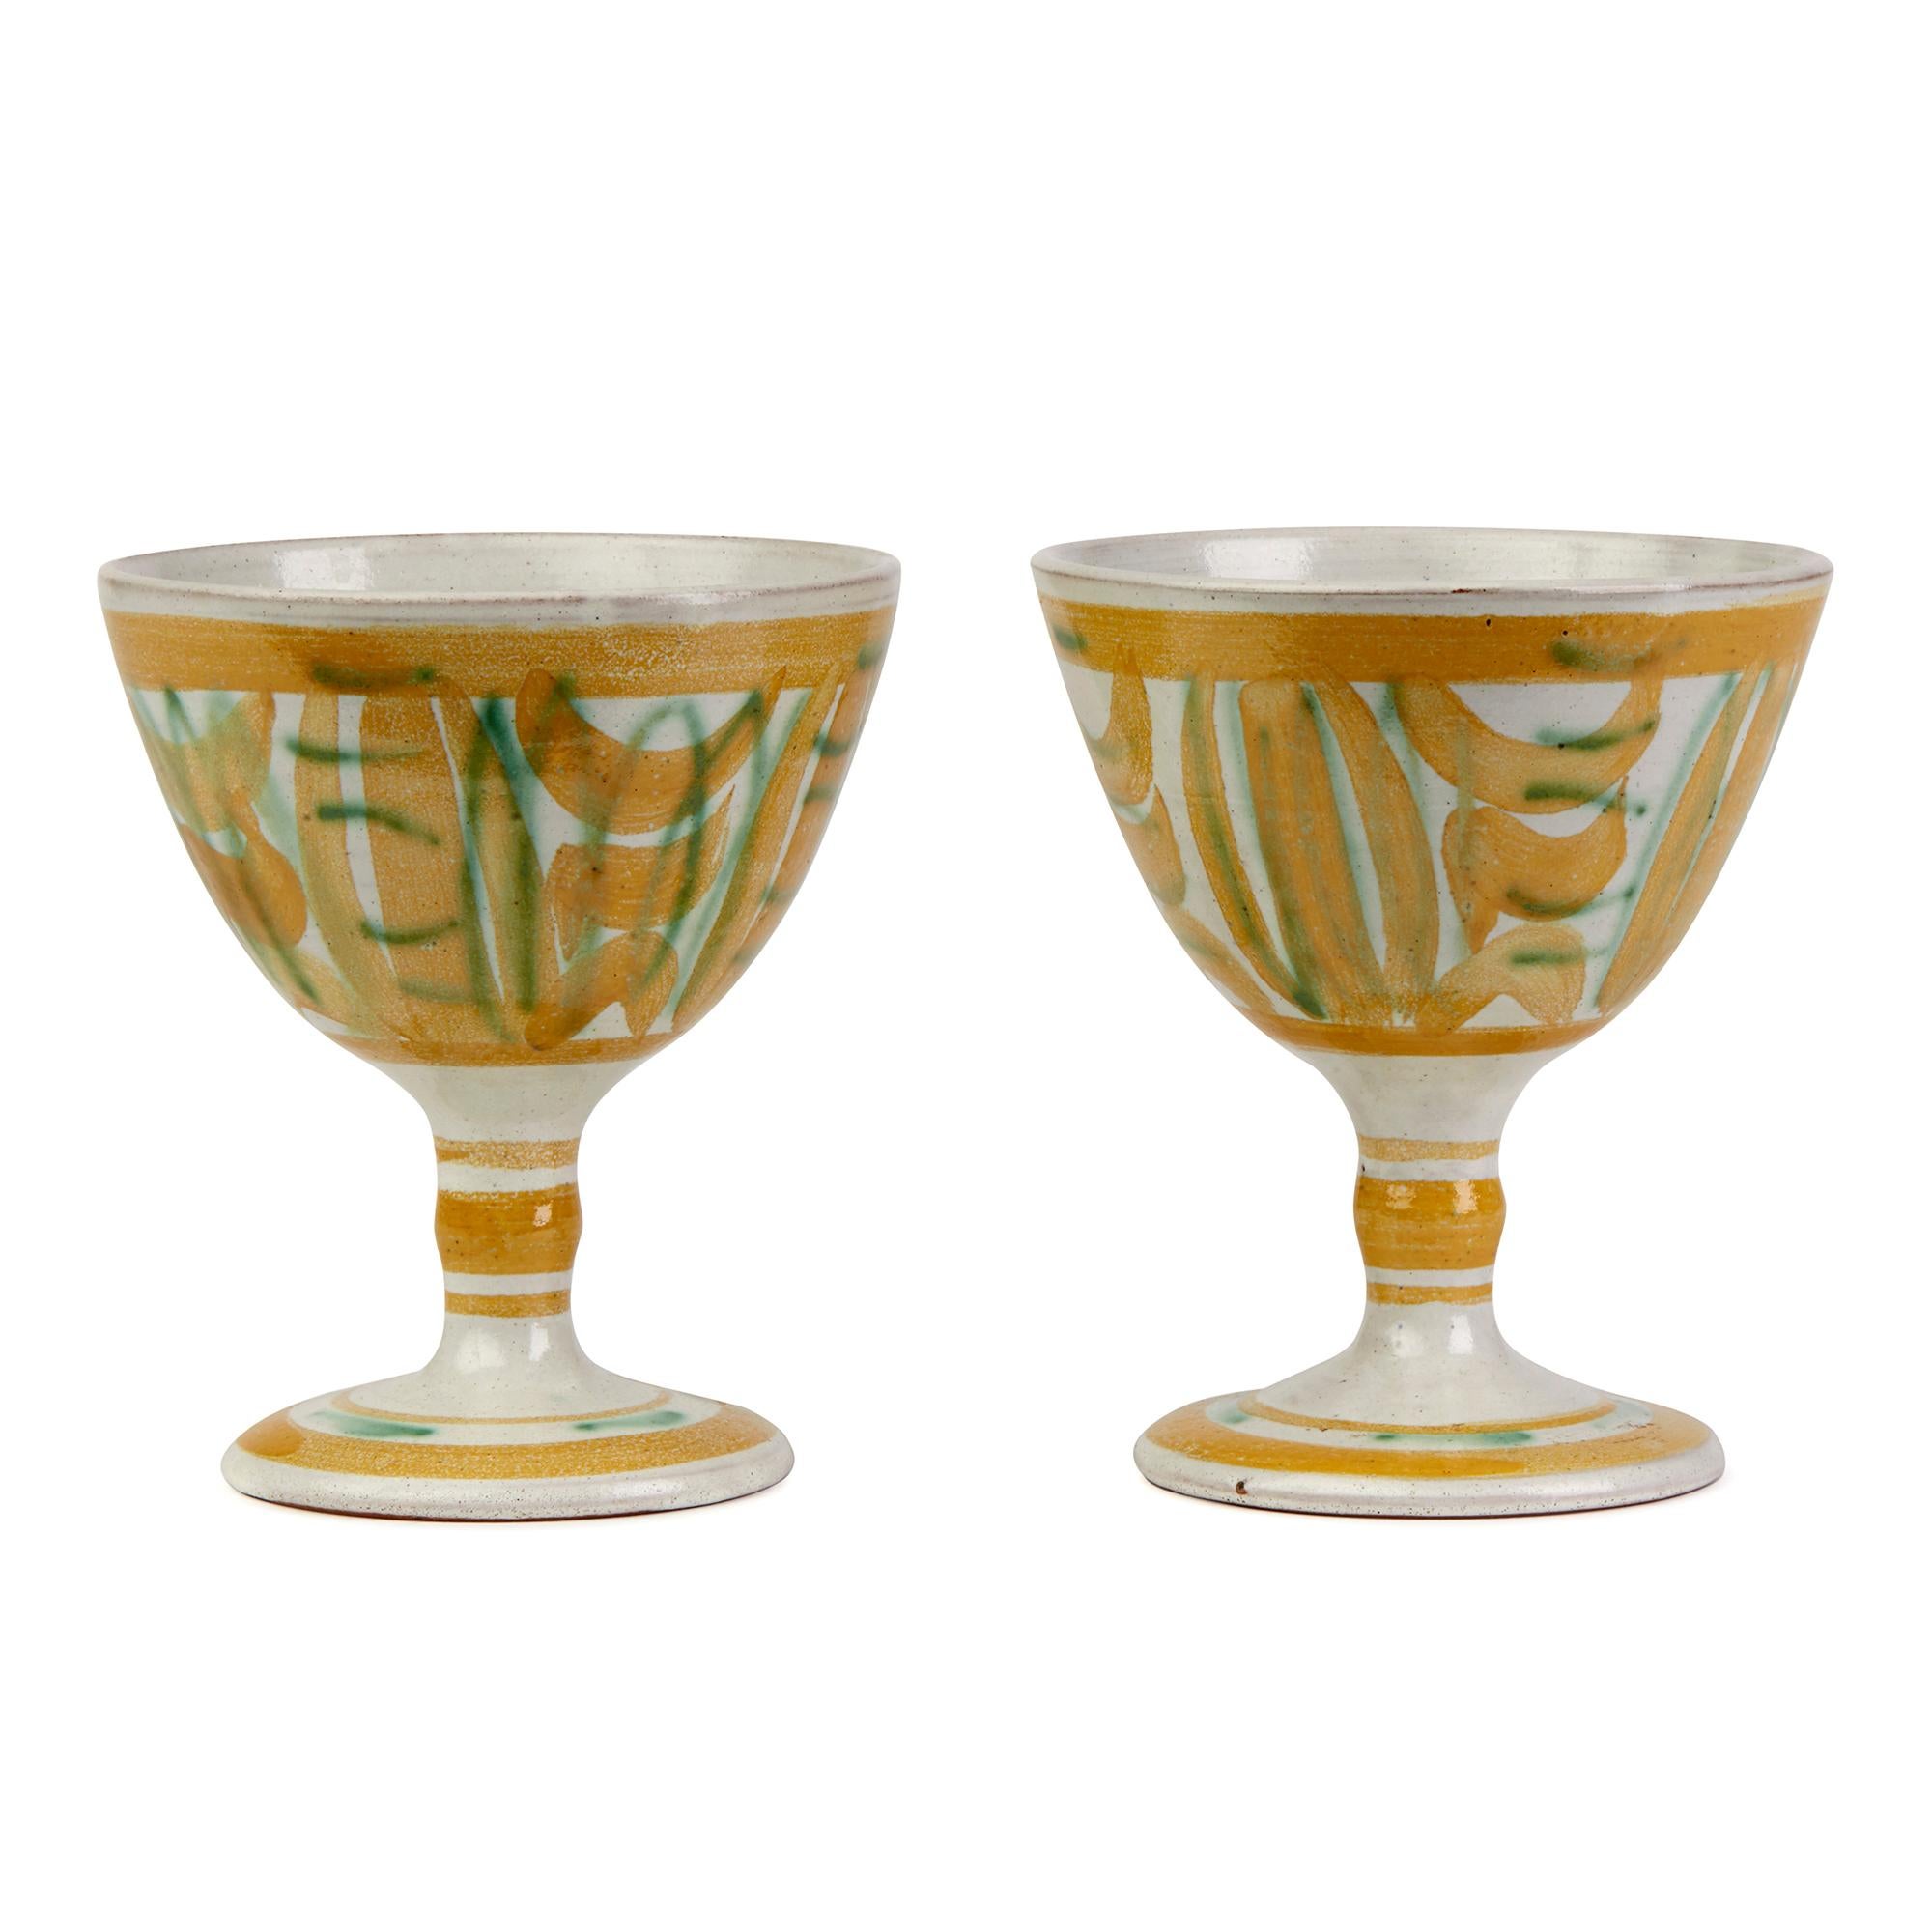 A stylish set five vintage Studio Pottery goblets made by renowned potter Alan Caiger Smith at Homer Street in London between 1956 and 1963. The goblets stand on a rounded pedestal base with narrow shaped stem with a rounded conical bowl and each is